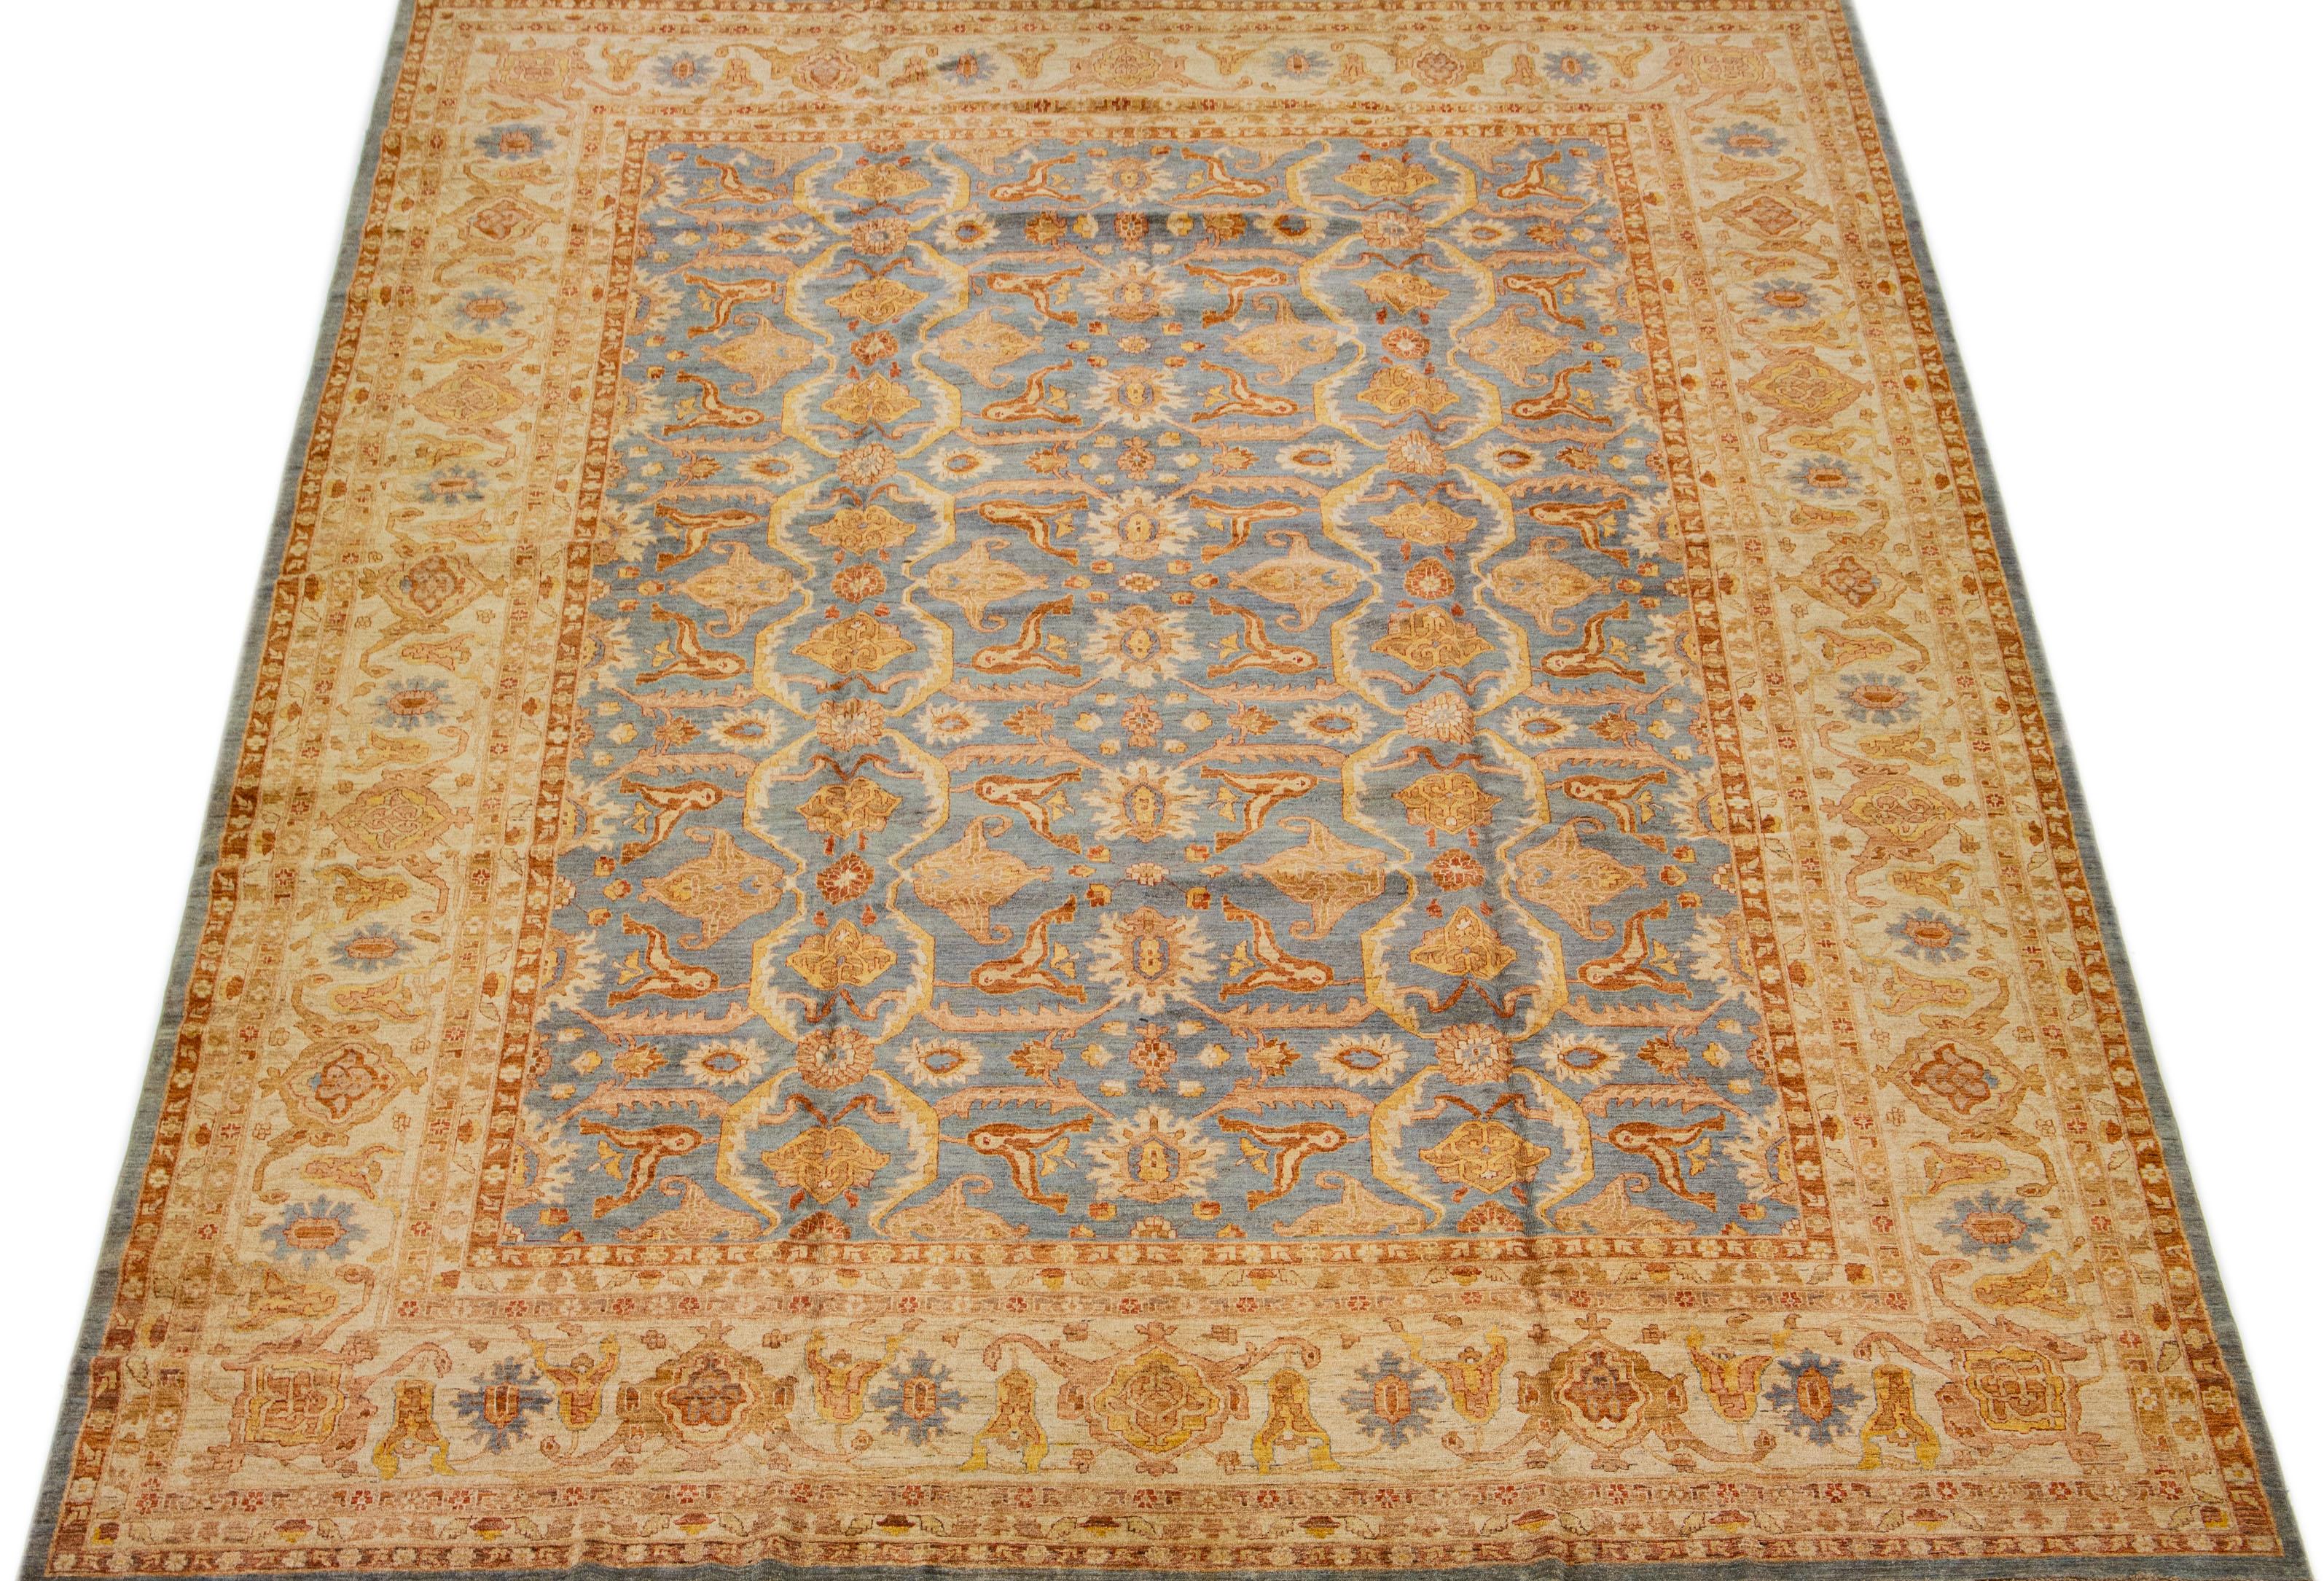 Beautiful Paki Peshawar hand knotted wool rug with a gray color field. This modern rug has rust and golden accents in a Classic all-over floral motif.

This rug measures 12'10